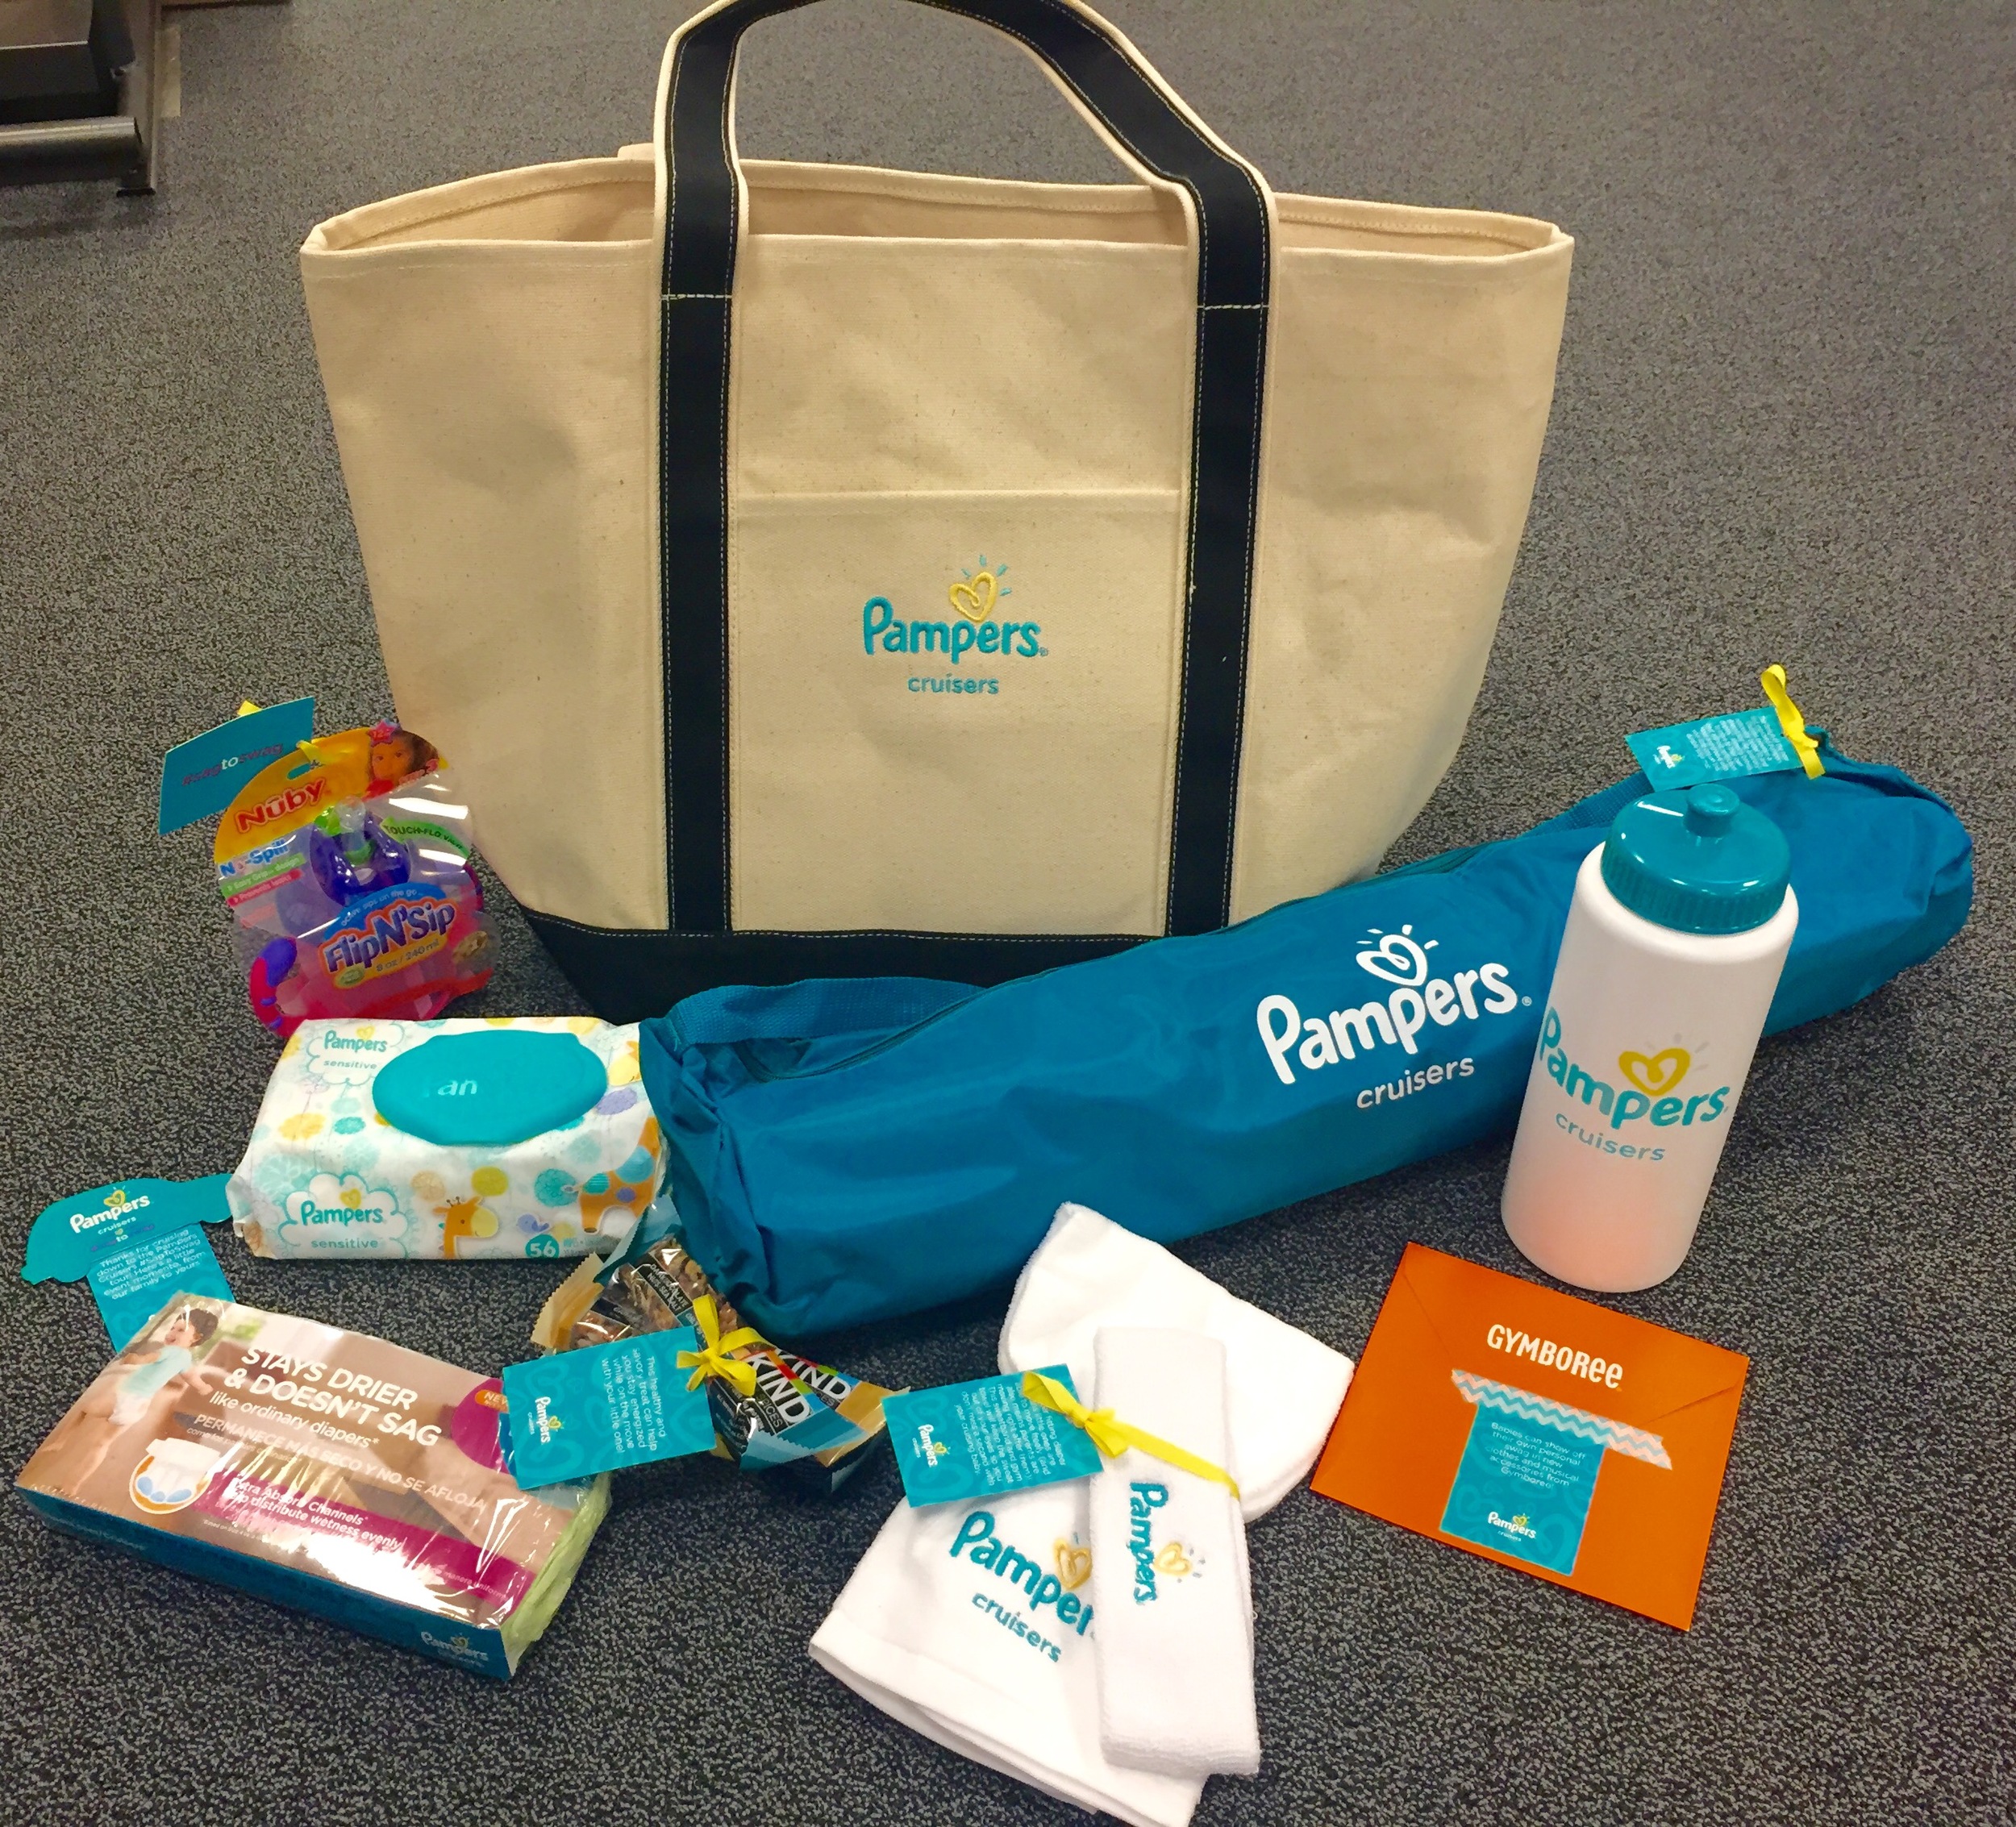 scrub Extraordinary Consistent Pampers Swag Bag Giveaway — Ronnie's Awesome List